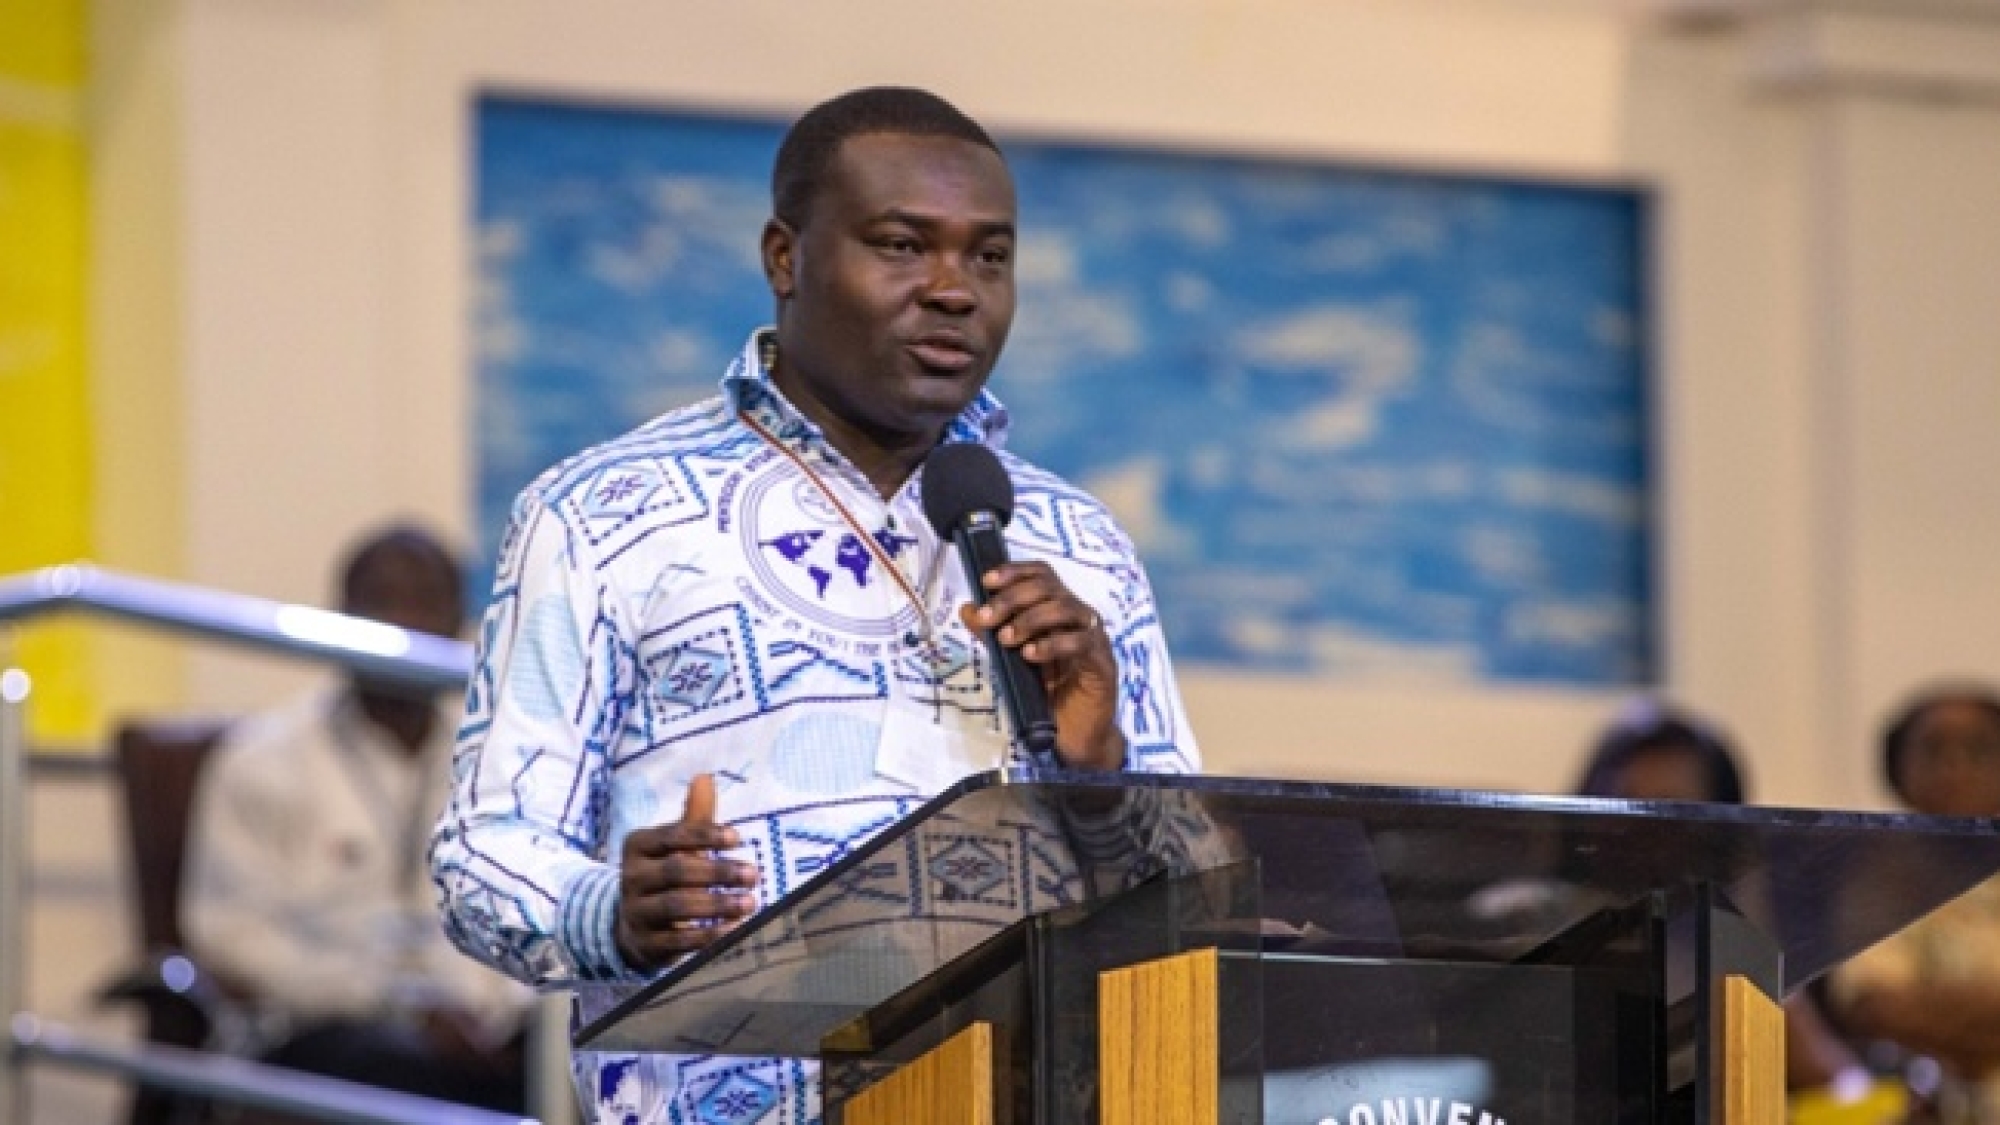 Don’t Compromise Kingdom Values And Principles – Pastor Obeng Advices